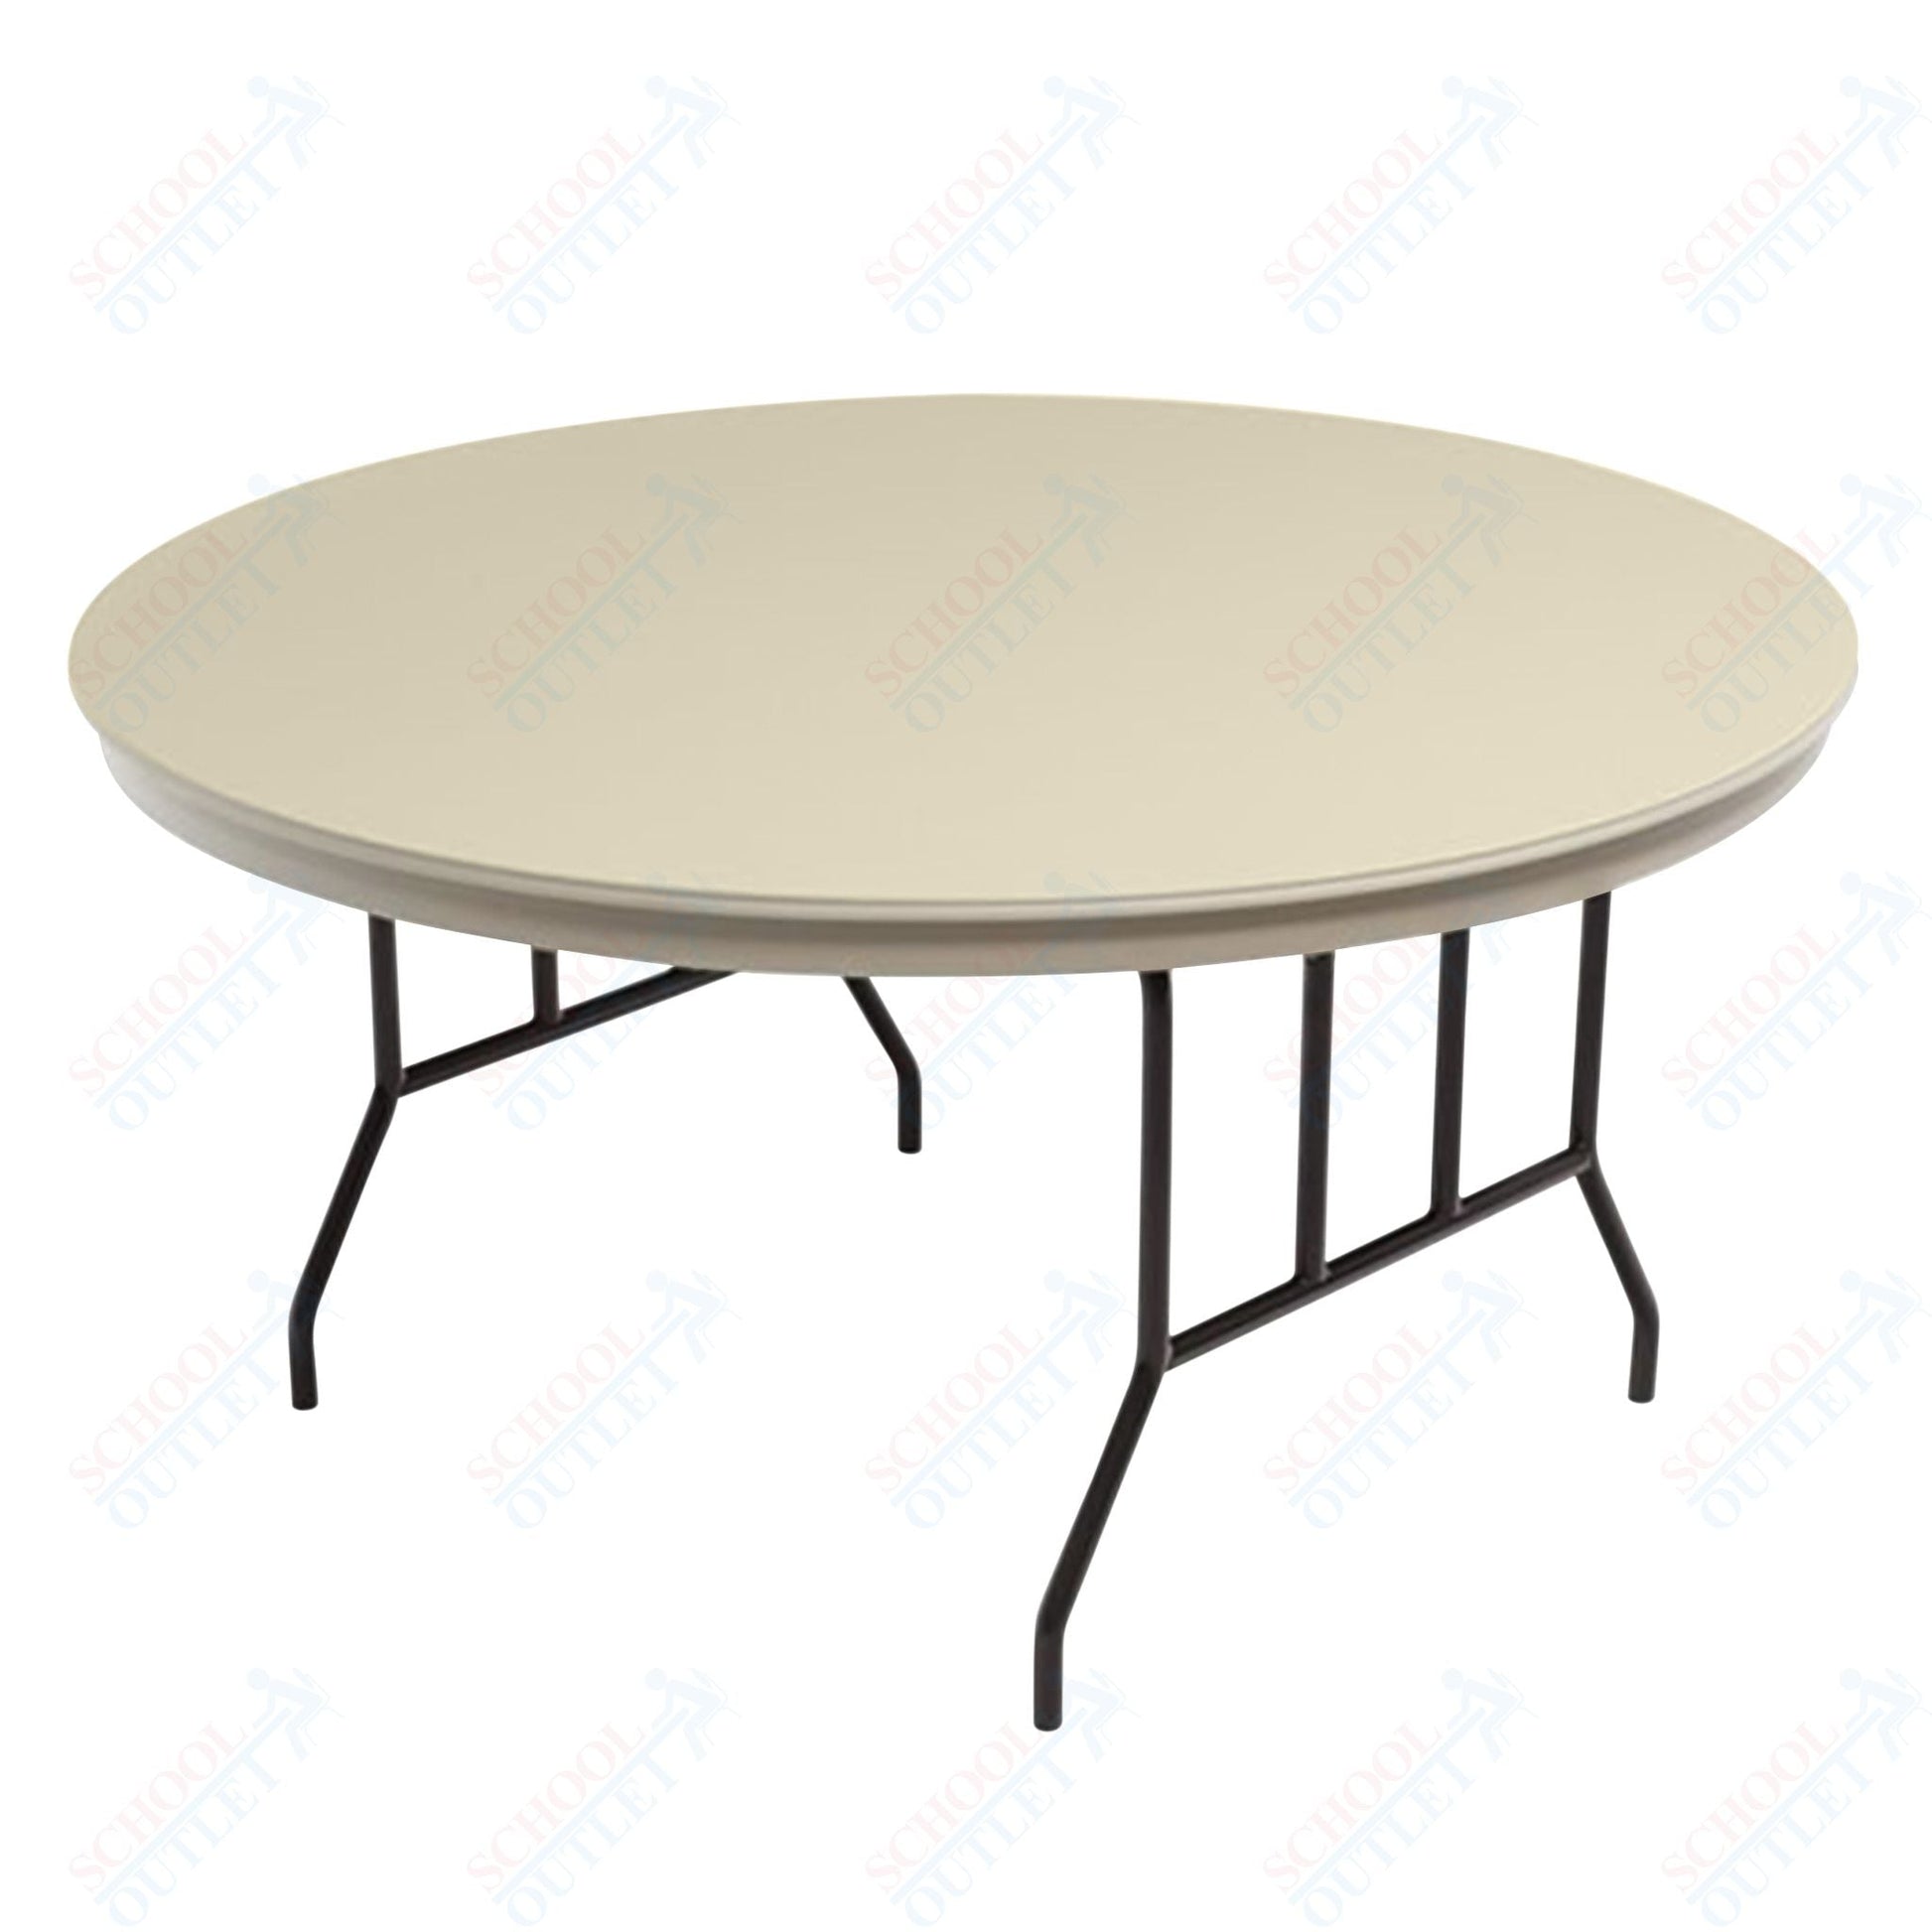 AmTab Dynalite Featherweight Heavy - Duty ABS Plastic Folding Table - Round - 72" Diameter x 29"H (AmTab AMT - R72DL) - SchoolOutlet